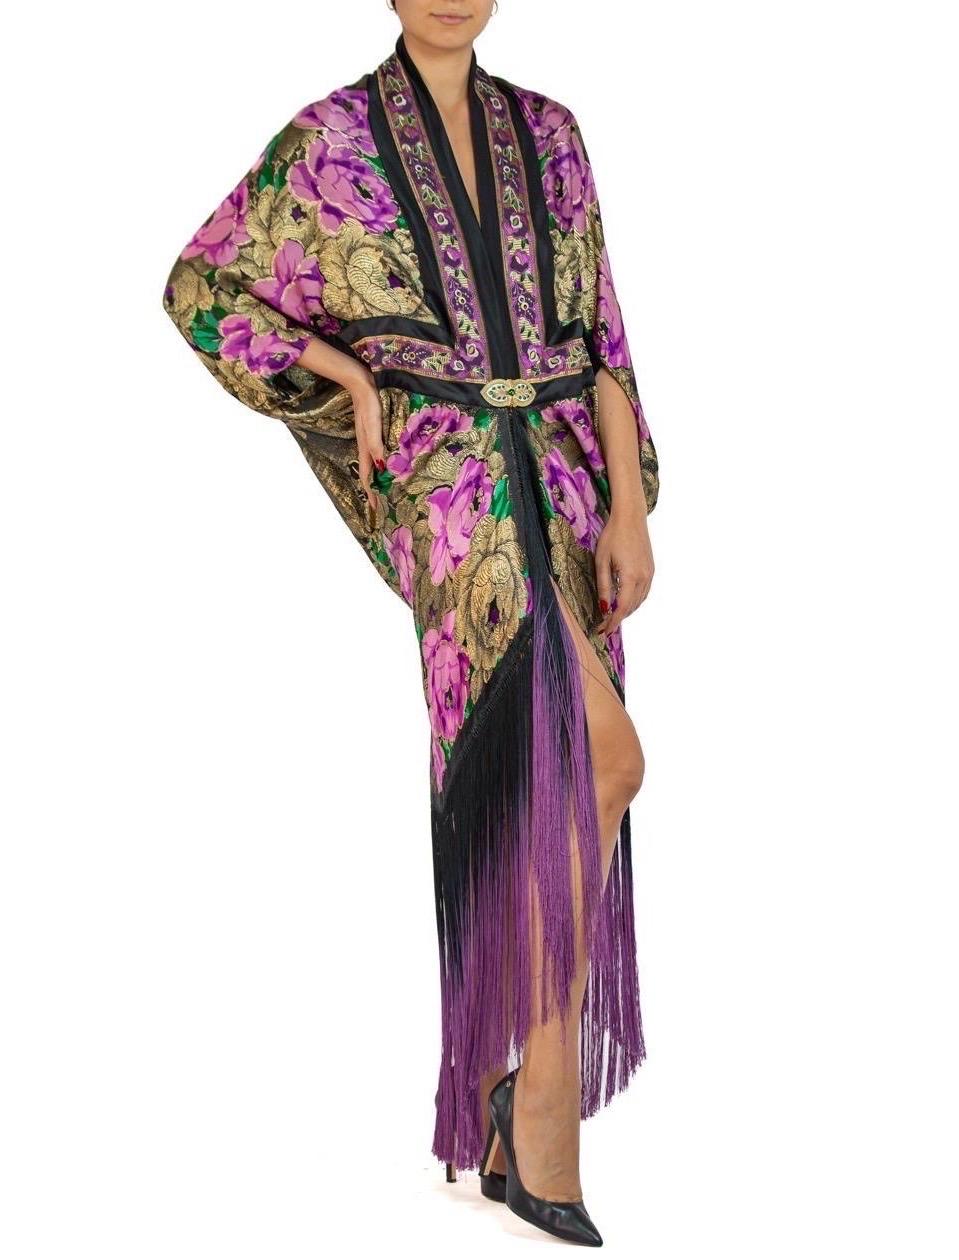 MORPHEW COLLECTION Black, Gold & Purple Metallic Silk Lamé Cocoon With Fringe A 1